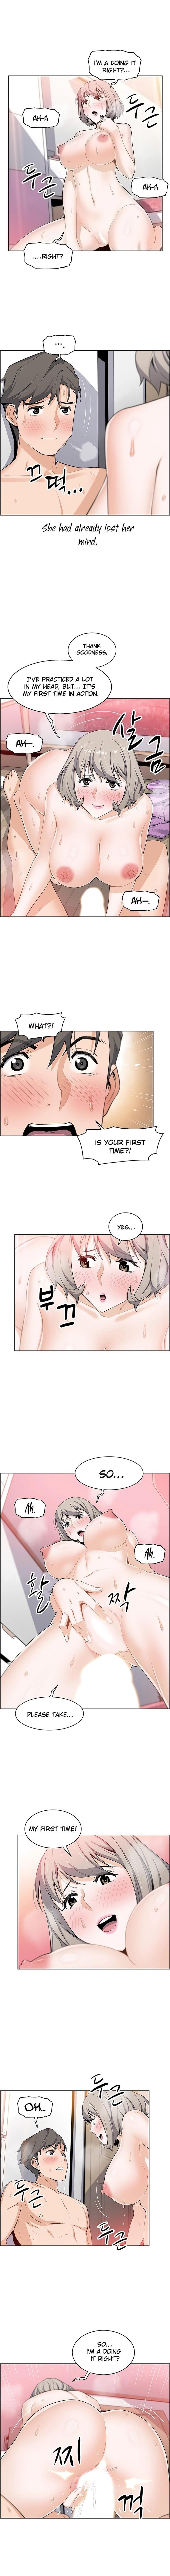 Housekeeper [Neck Pillow, Paper] Ch.49/49 [English] [Manhwa PDF] Completed 174